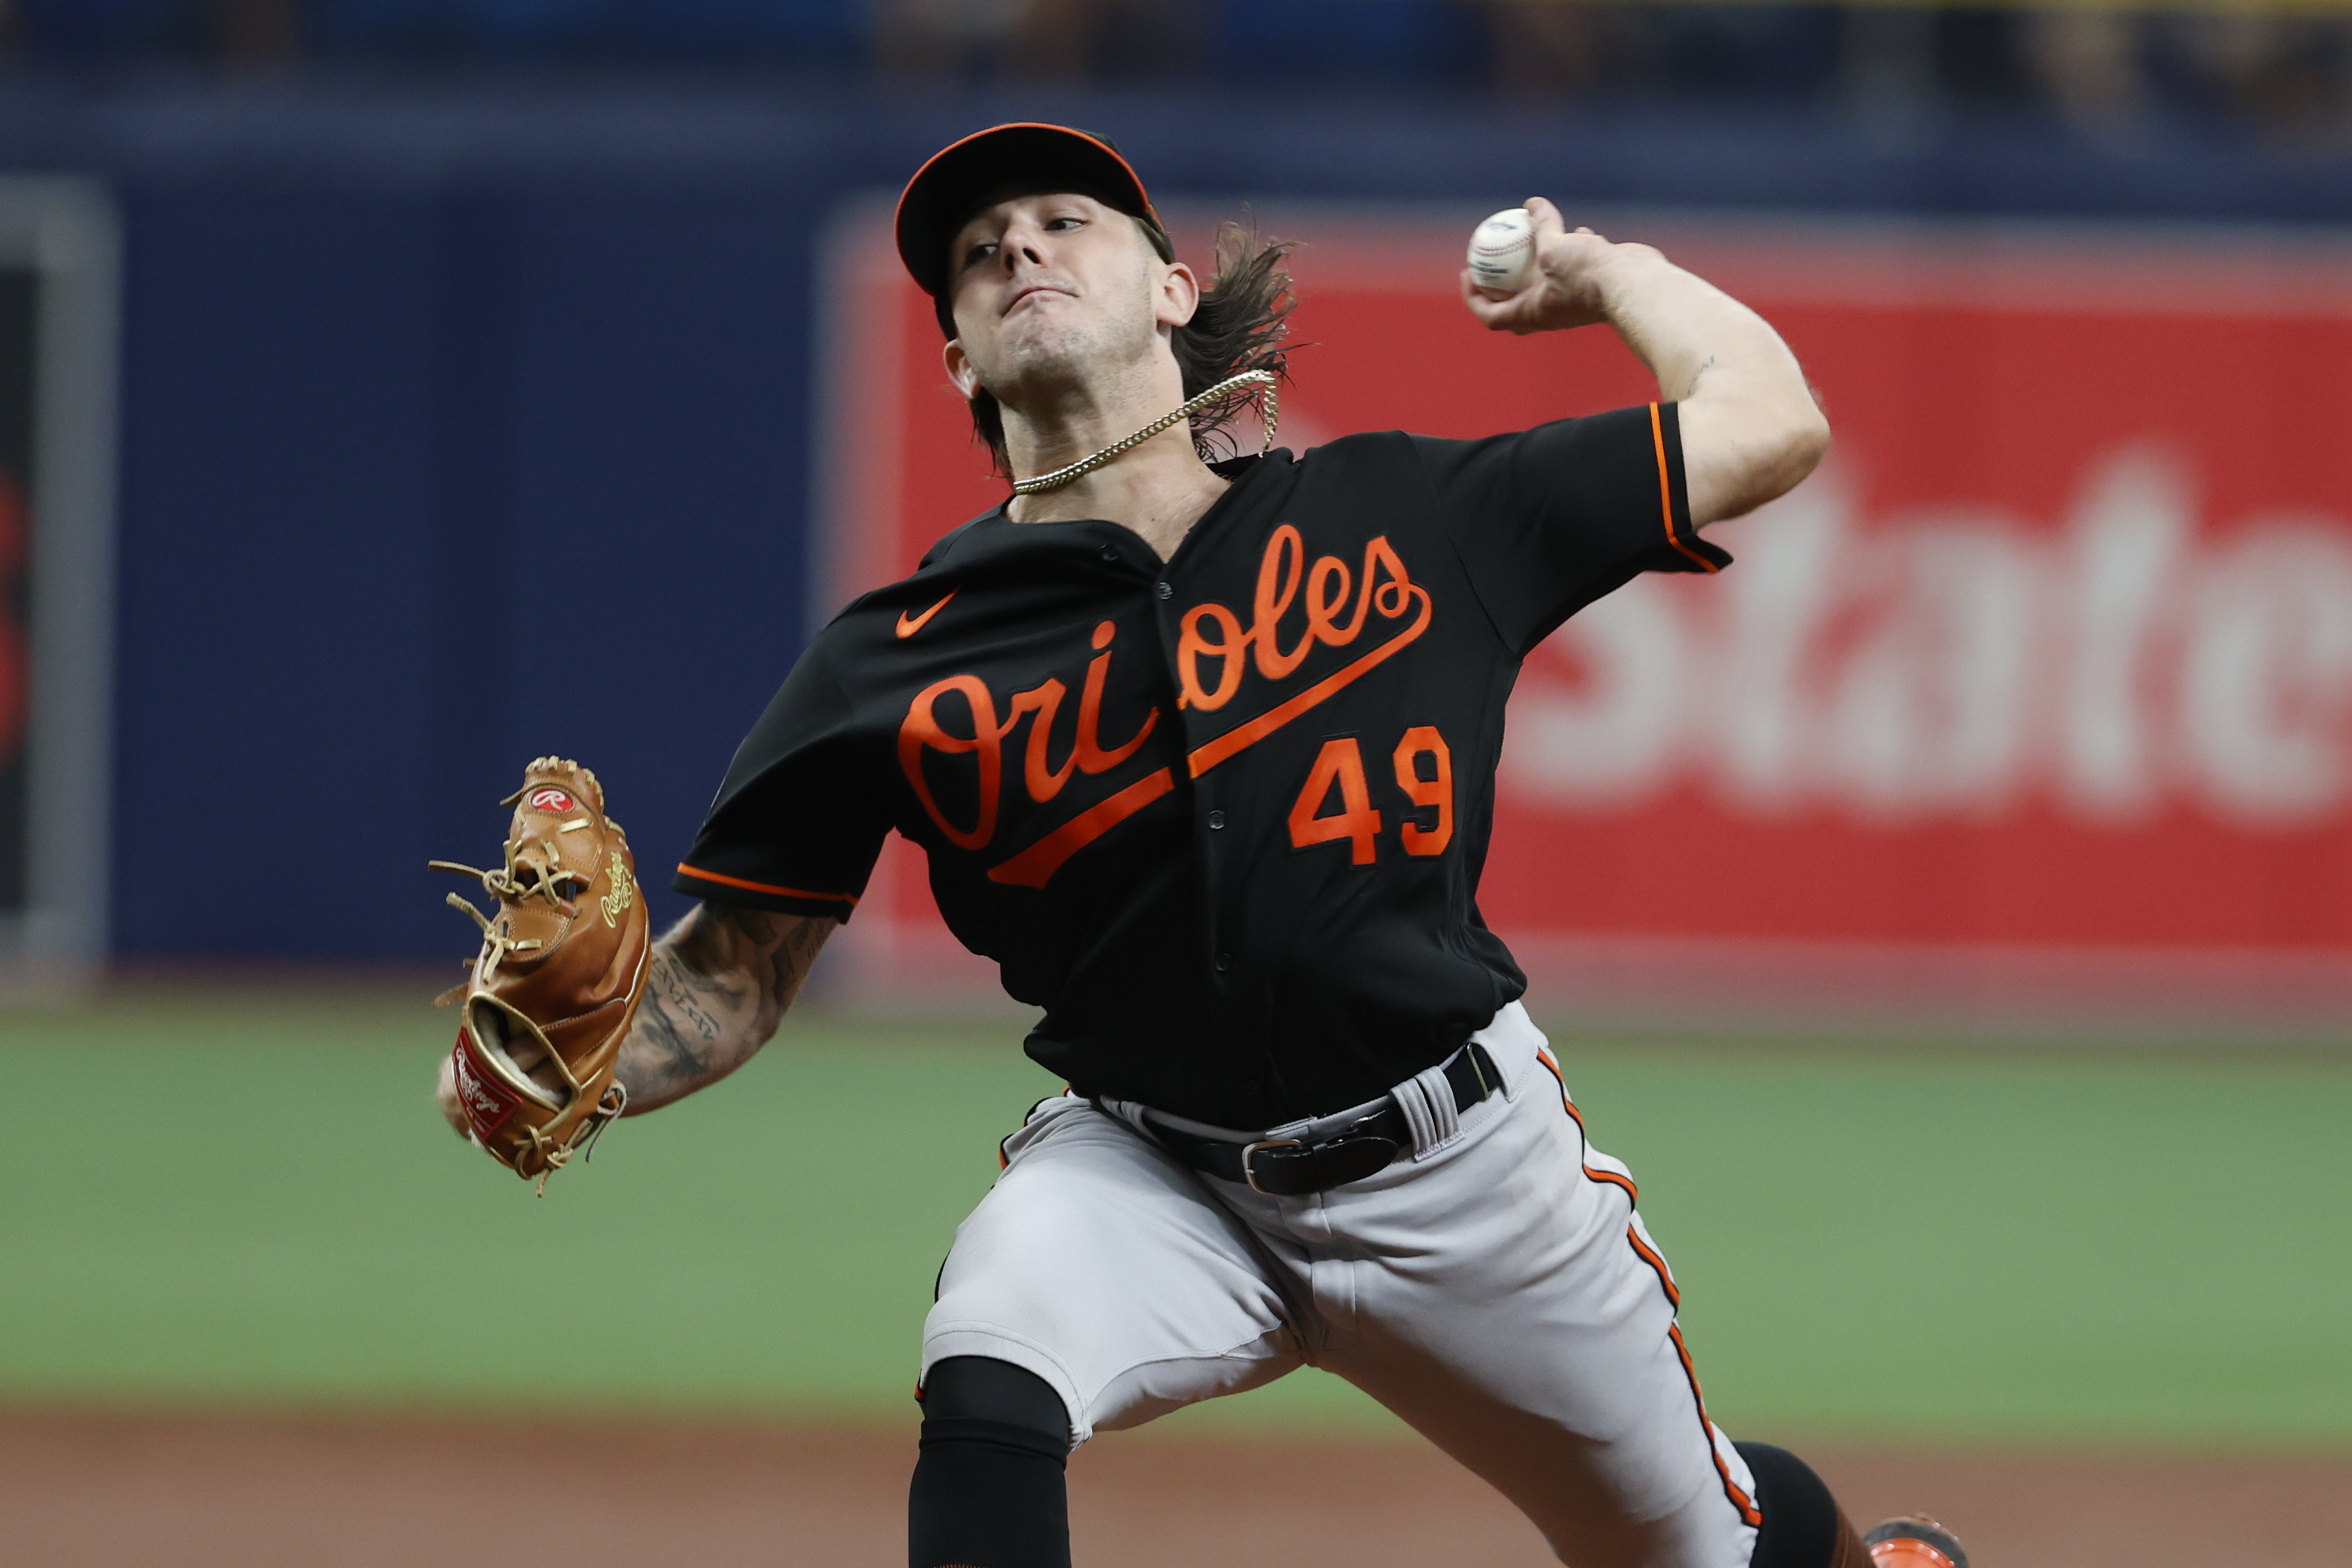 For the Orioles' DL Hall, a glove is a reminder he's made it